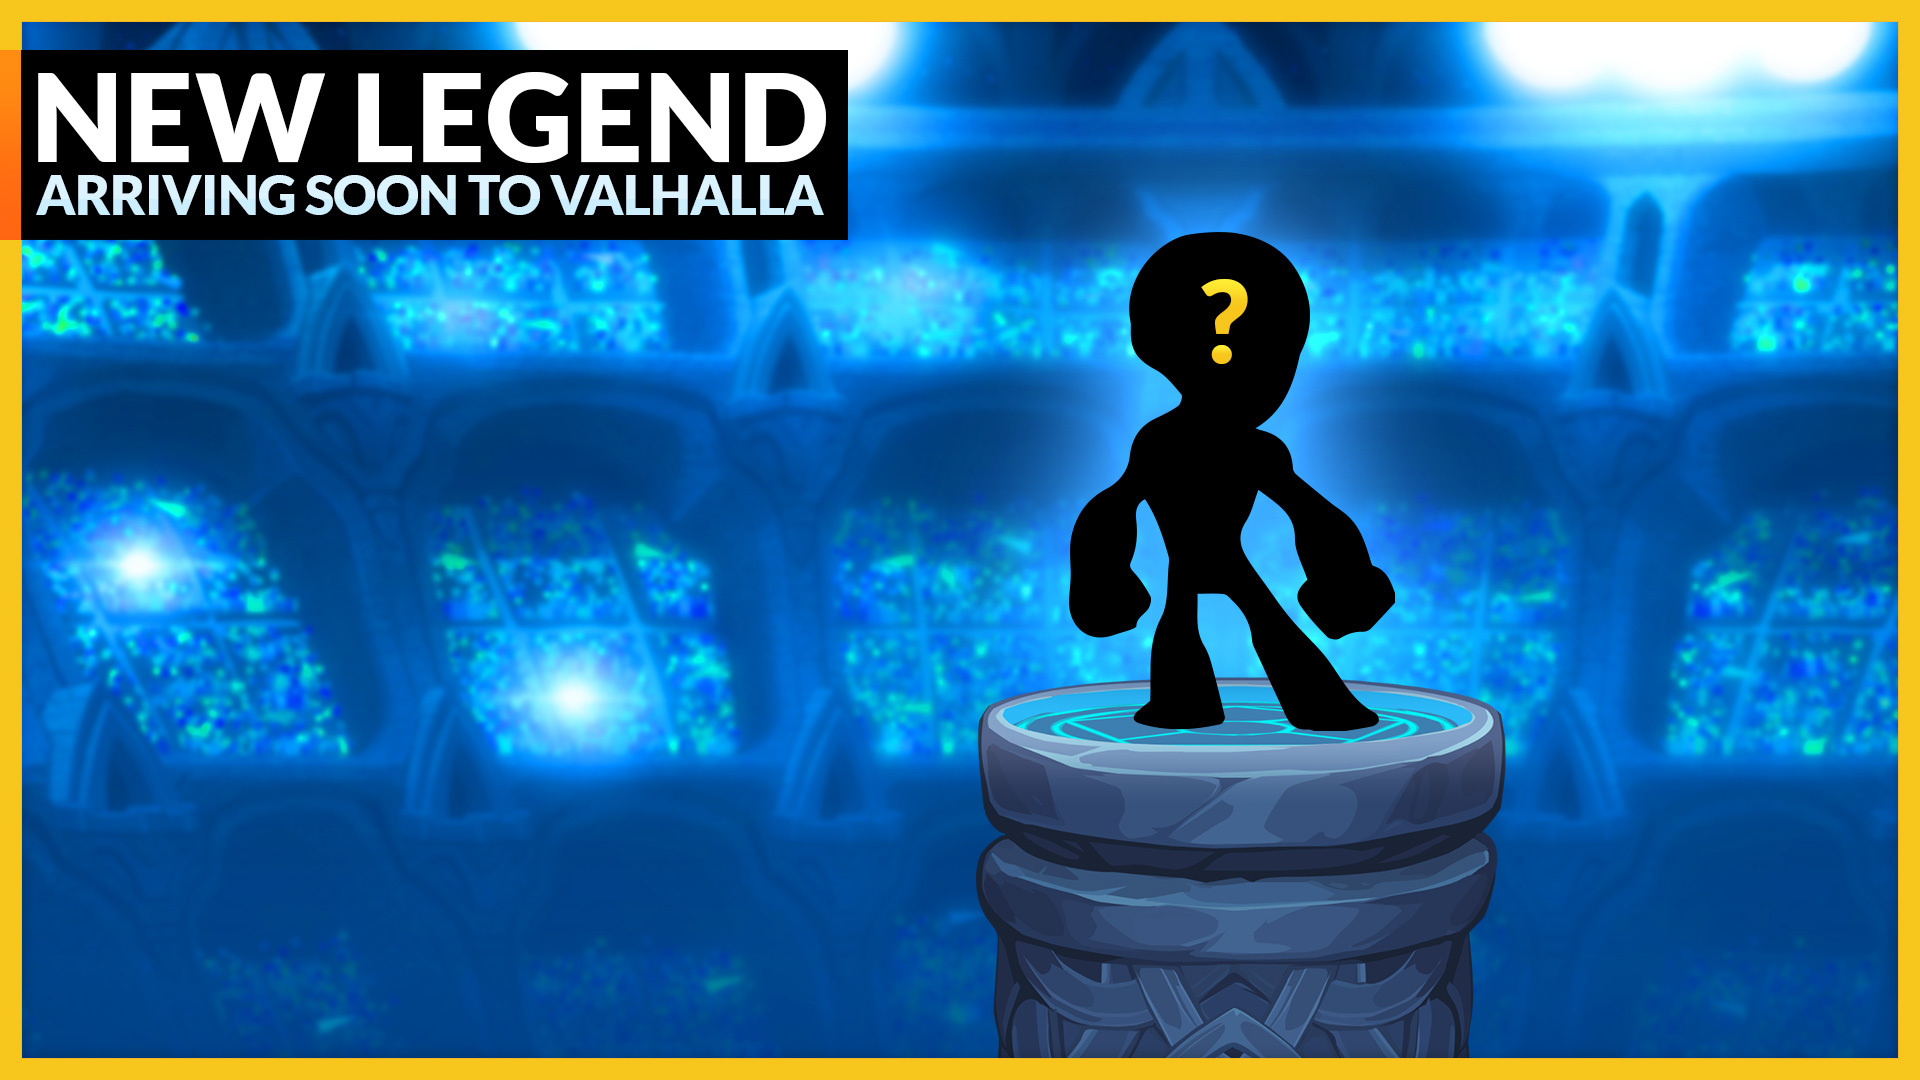 The Next Legend Is Coming Soon&#8230;